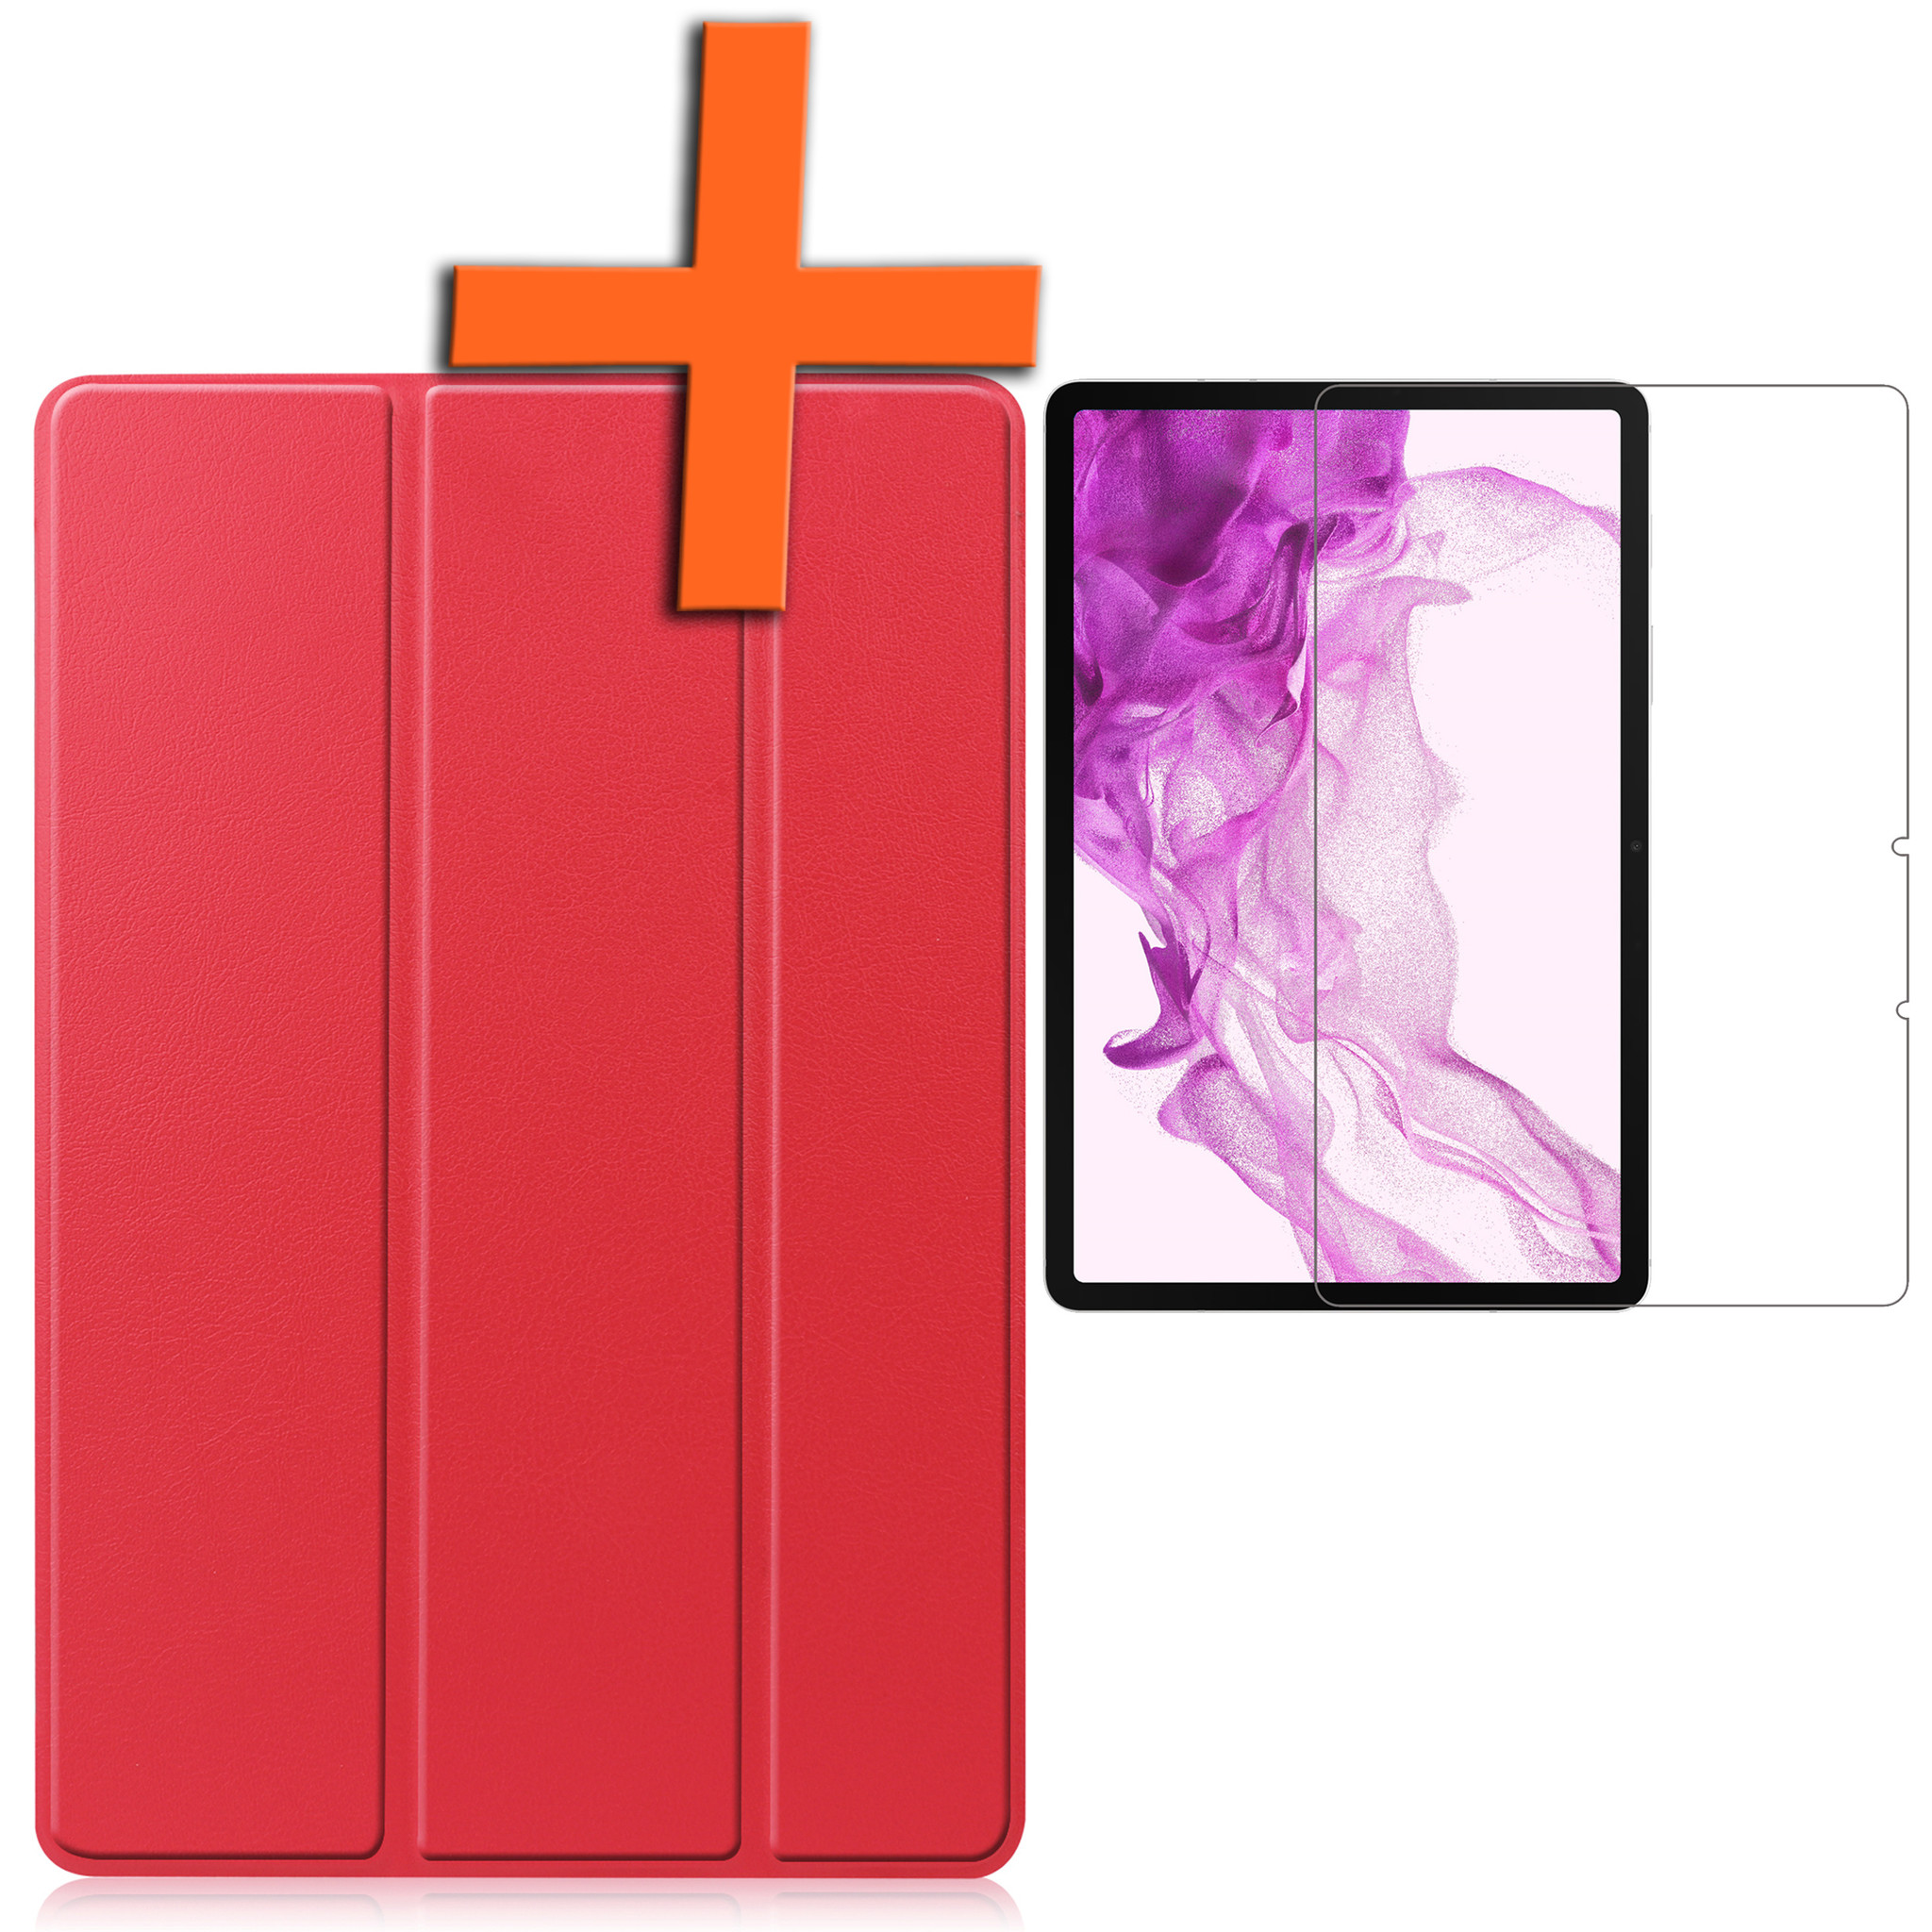 Samsung Galaxy Tab S8 Plus Hoesje 12.4 inch Case Rood - Samsung Galaxy Tab S8 Plus Hoes Hardcover Hoesje Bookcase Met Uitsparing S Pen - Rood